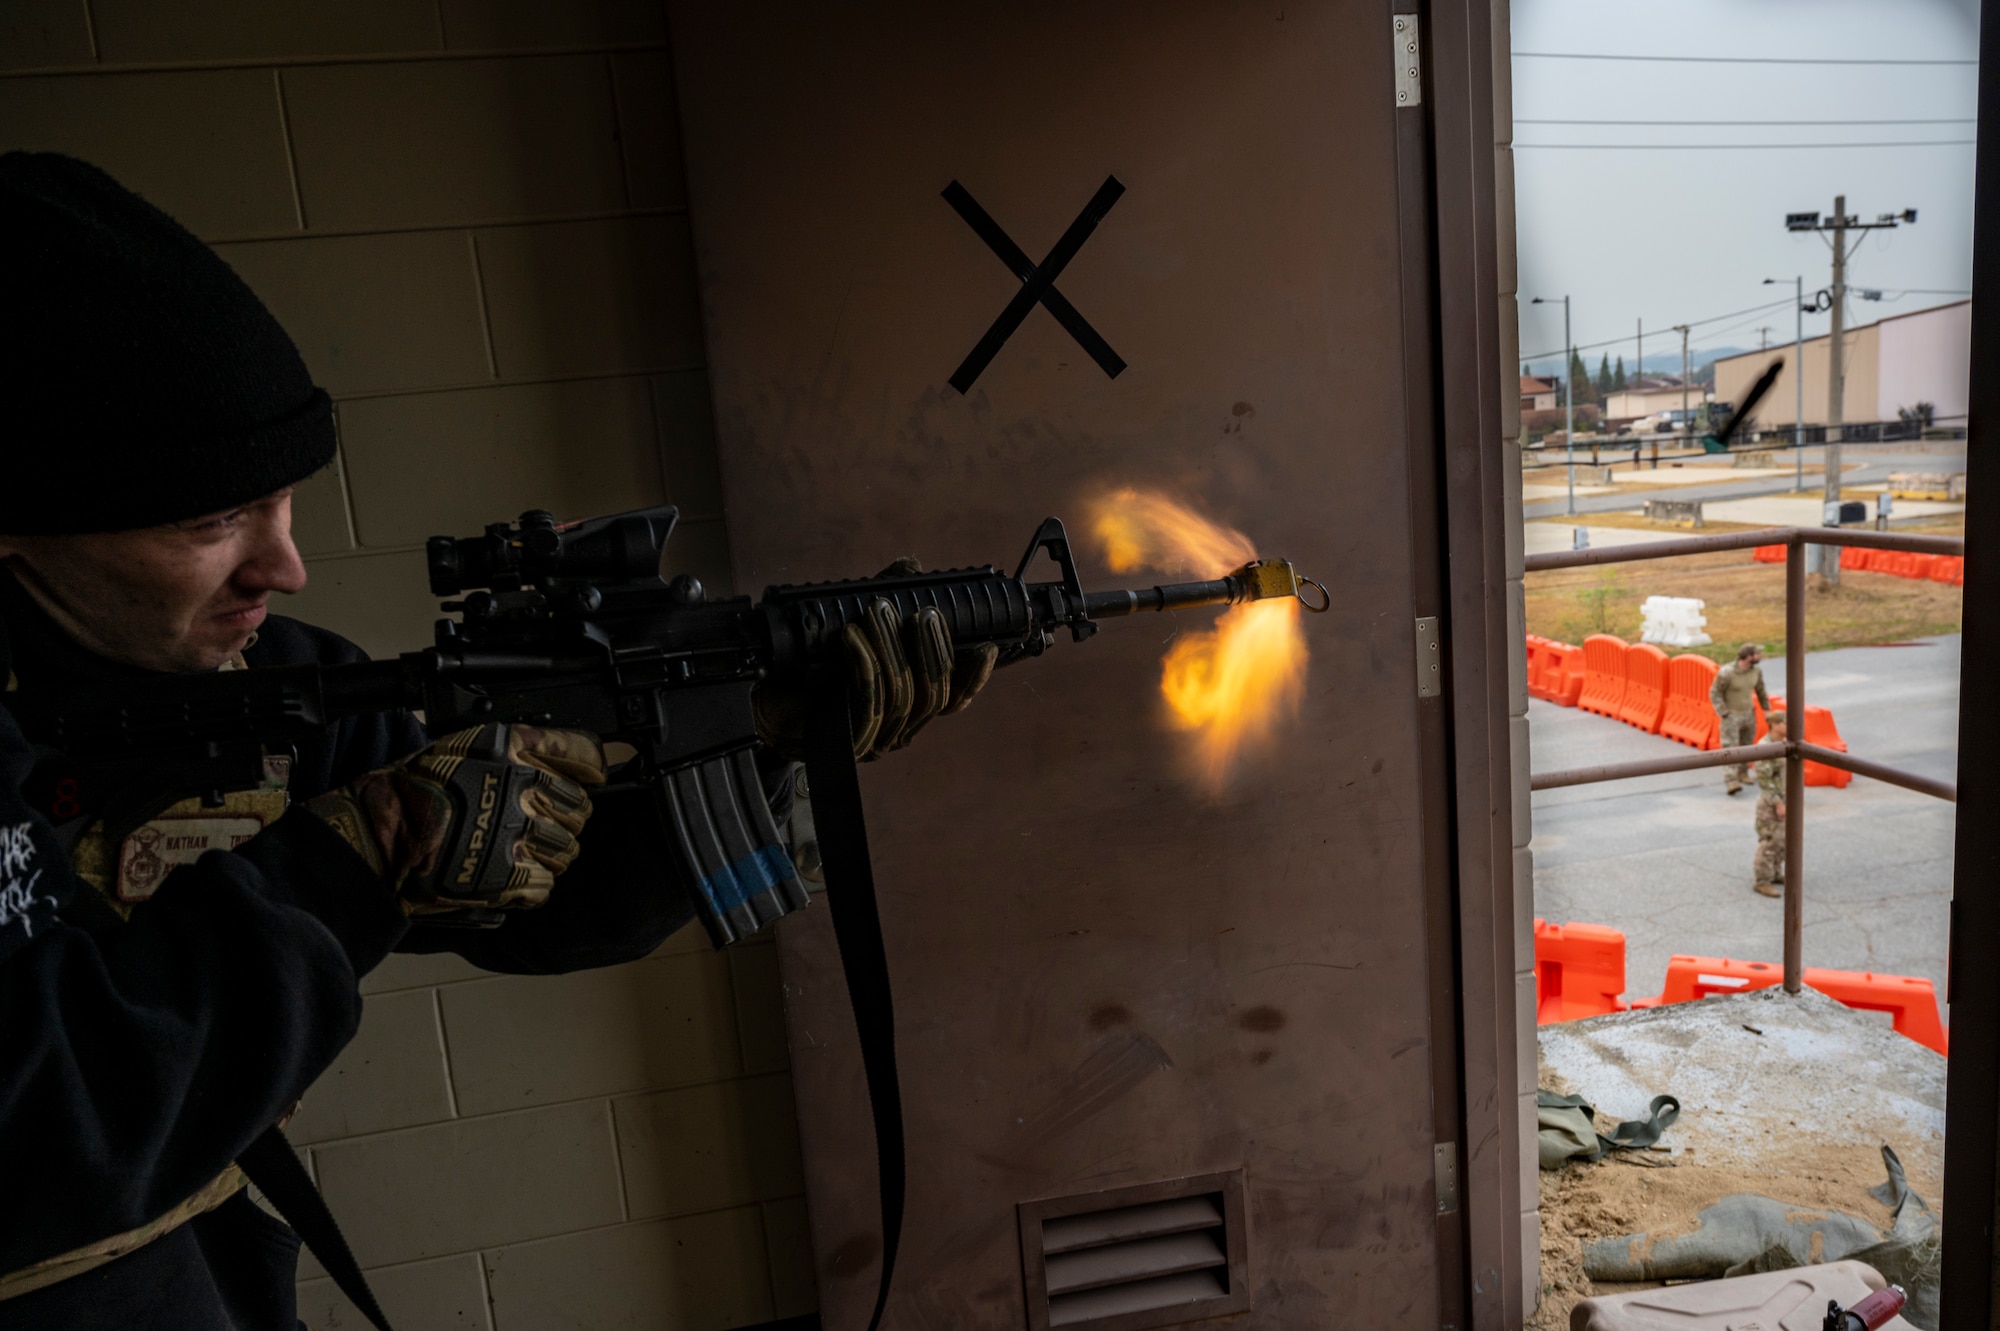 A U.S. Air Force 51st Security Forces Squadron Defender, fires blank rounds from an M4 Carbine rifle during a joint Combat Readiness Course (CRC) training with Republic of Korea Military Police members Osan Air Base, ROK, Nov. 3, 2022.